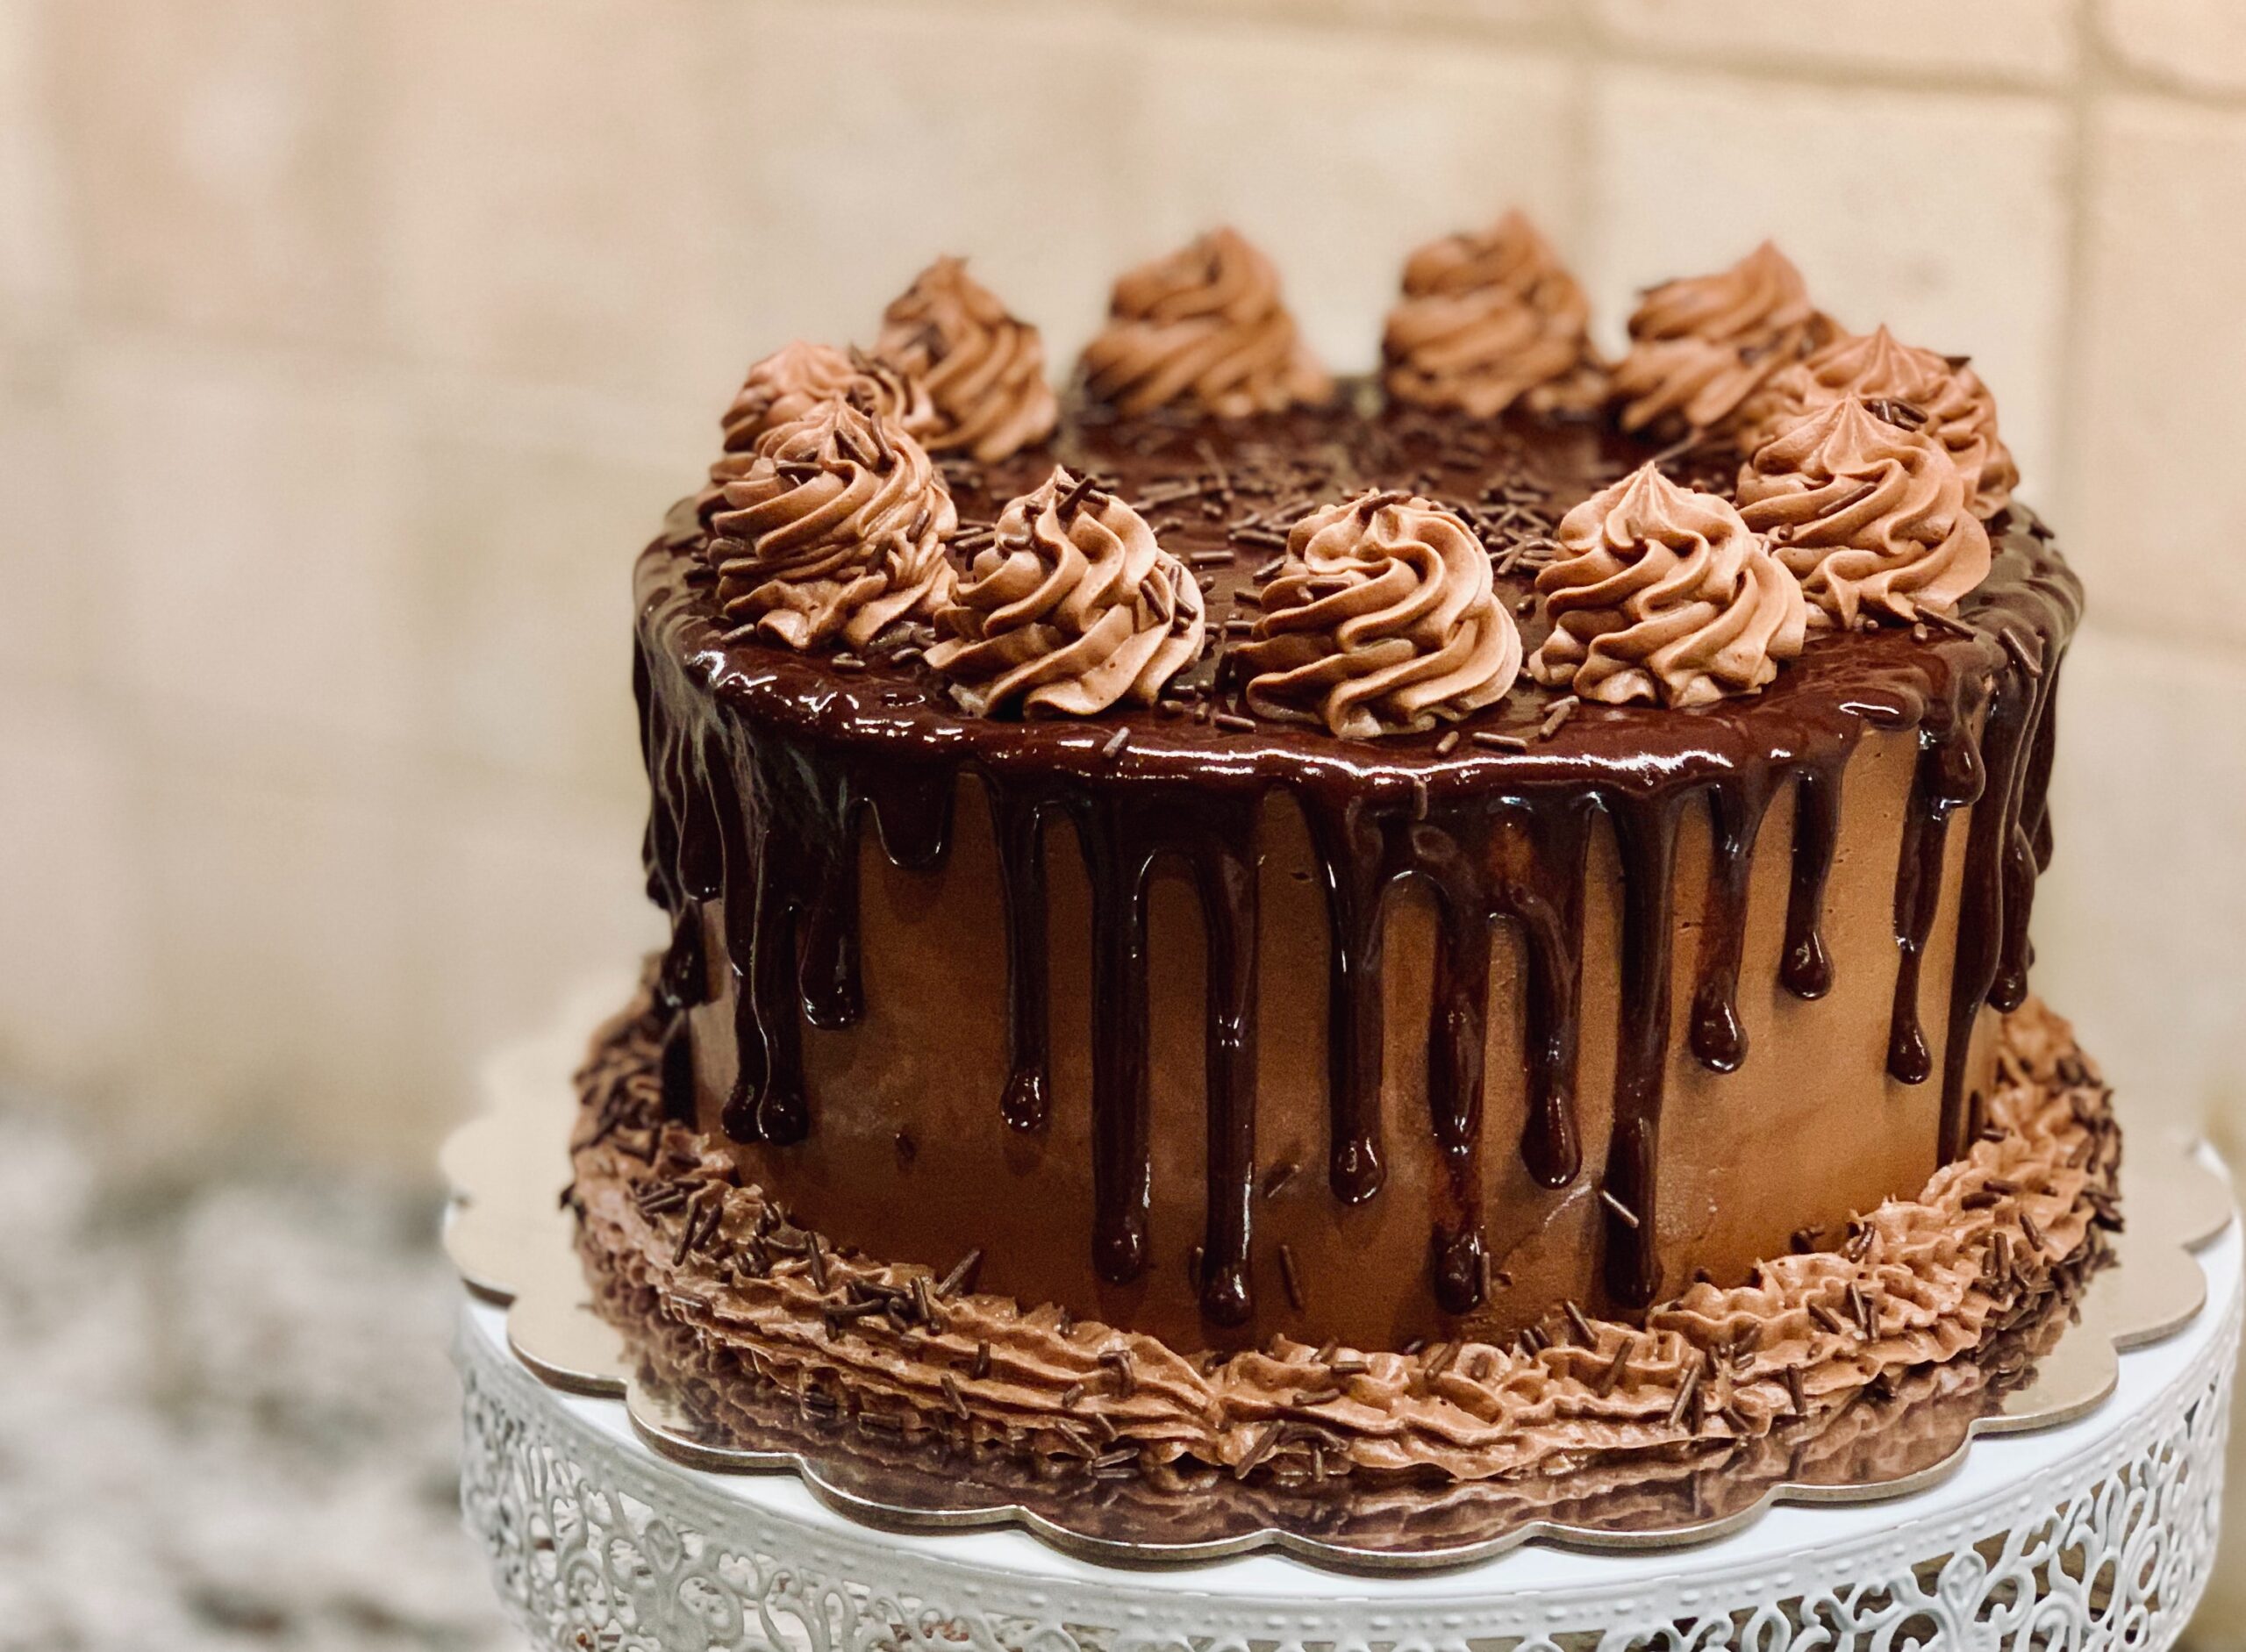 Salted Caramel Chocolate Delight